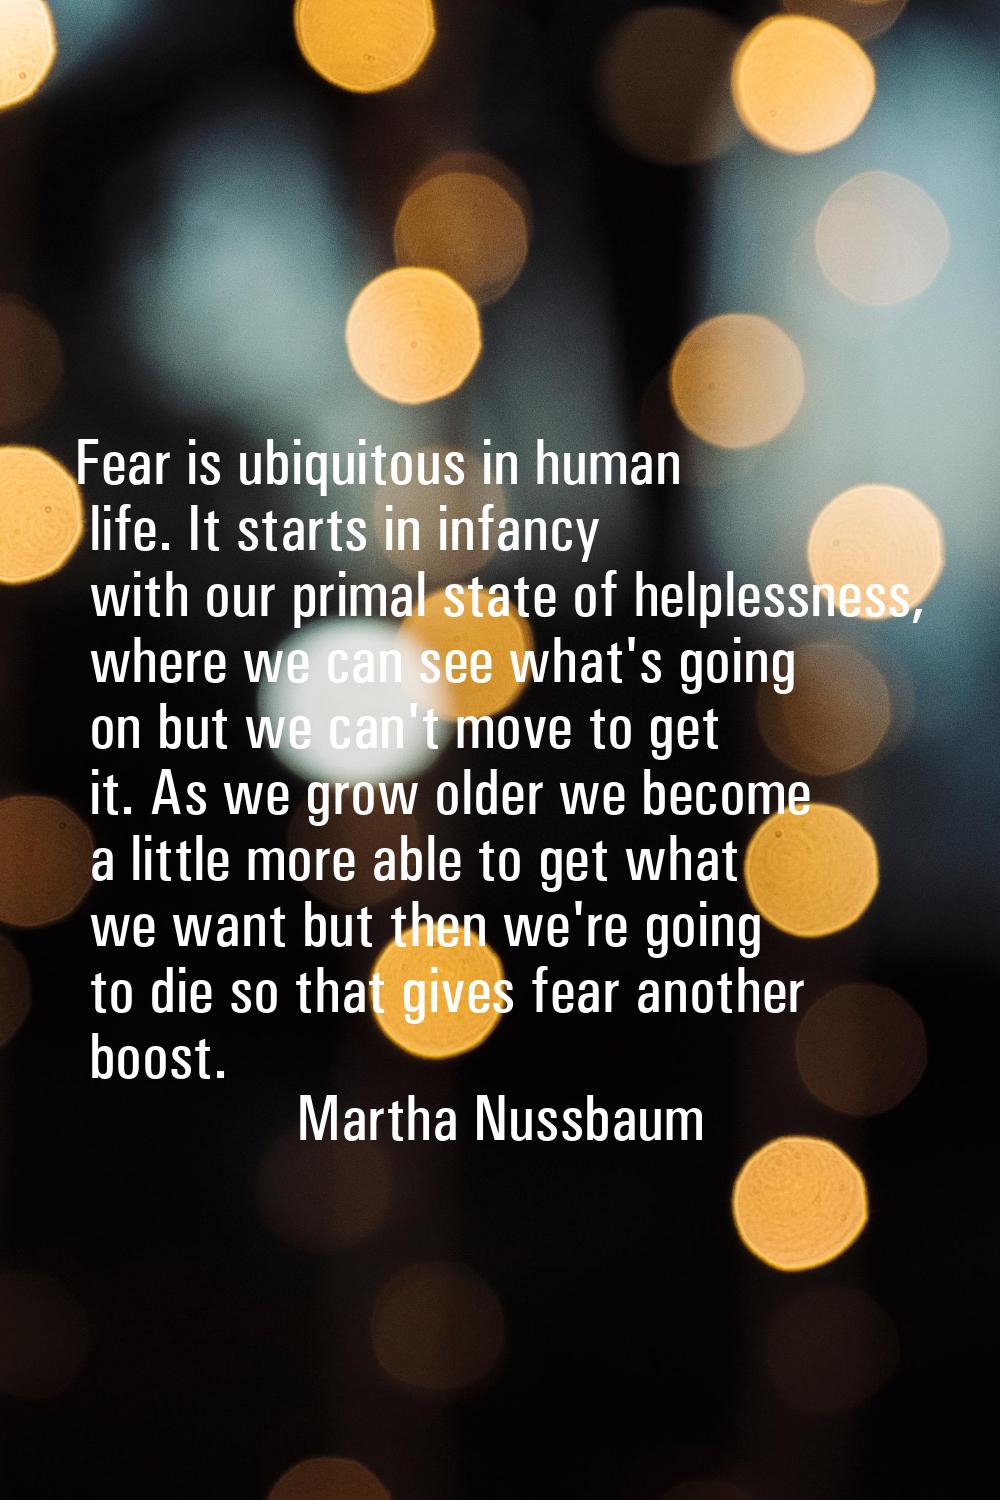 Fear is ubiquitous in human life. It starts in infancy with our primal state of helplessness, where